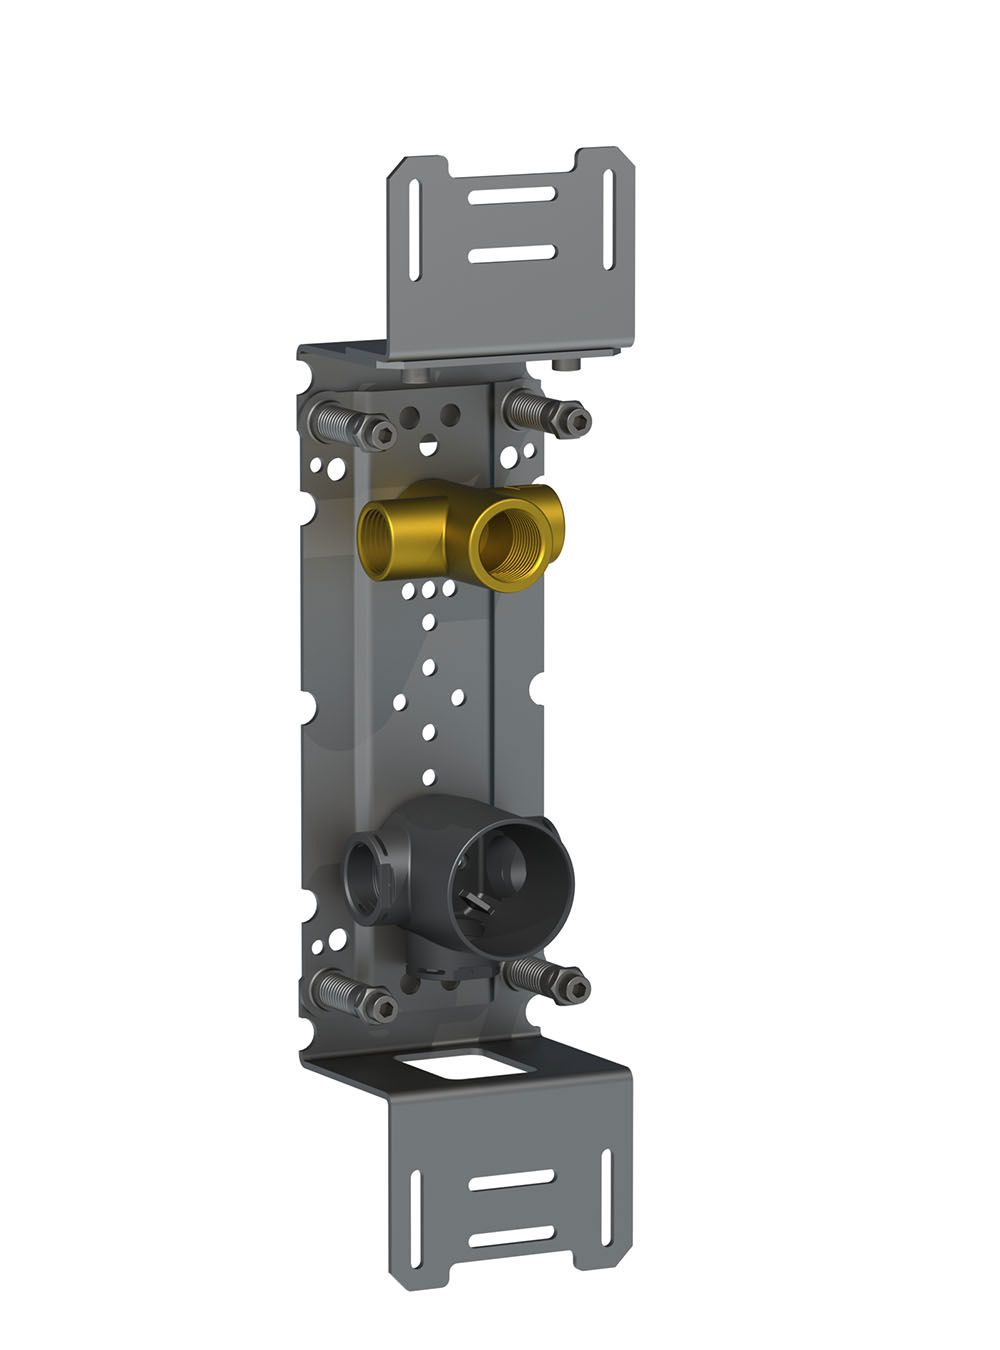 4300: Build-in valve with on-off sensor for ‘hands free’ operation for vertical installation.
Valve box fo